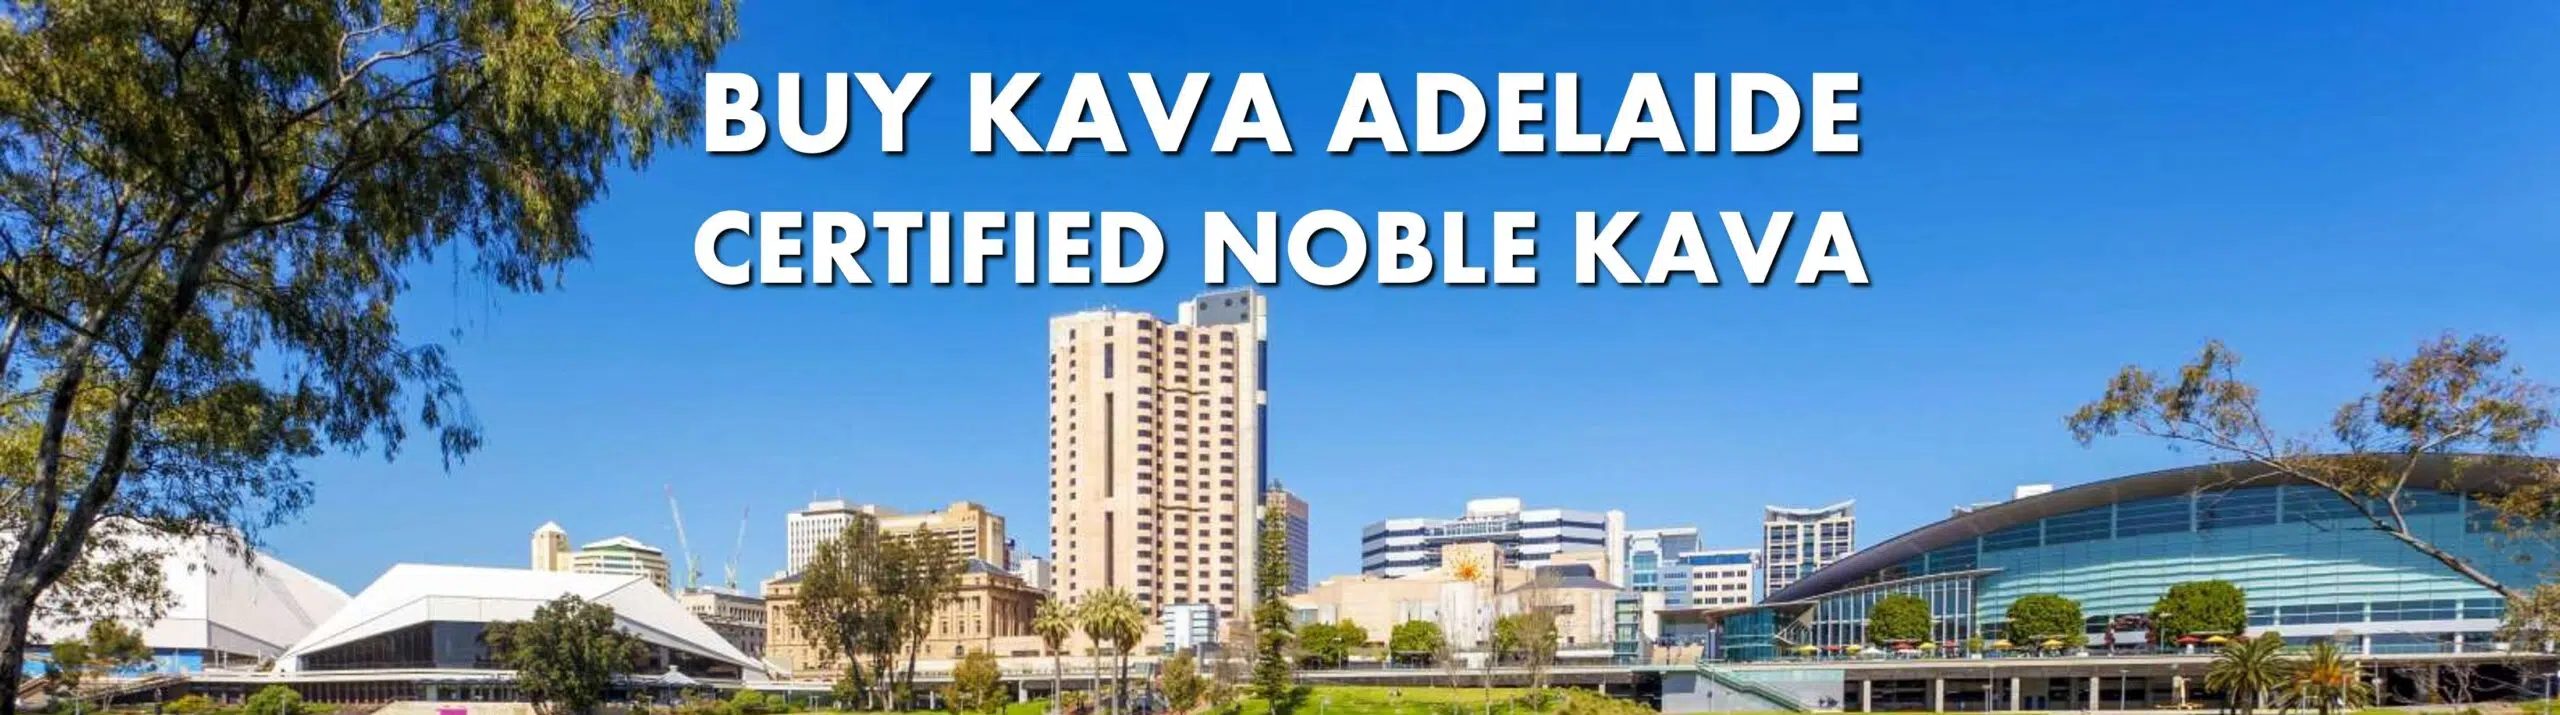 Adelaide cityscape with caption - Buy Kava Adelaide Certified Noble Kava